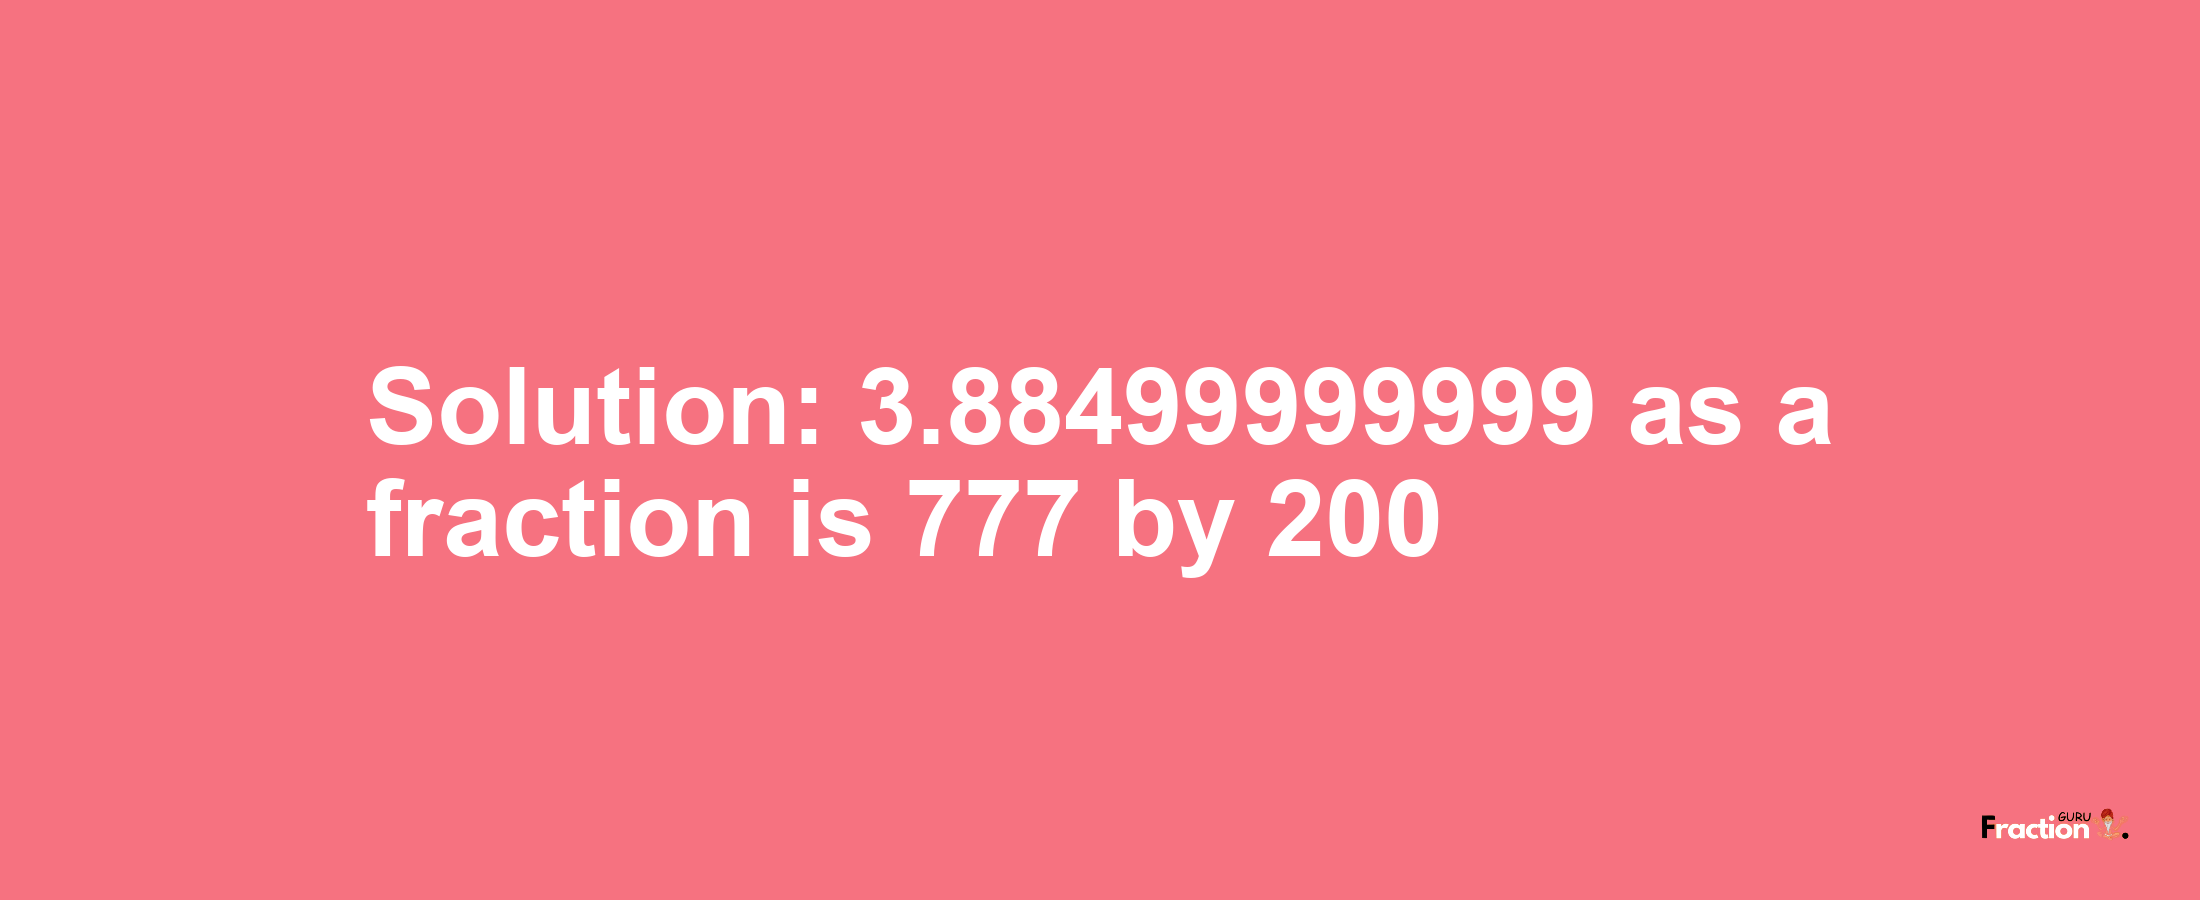 Solution:3.88499999999 as a fraction is 777/200